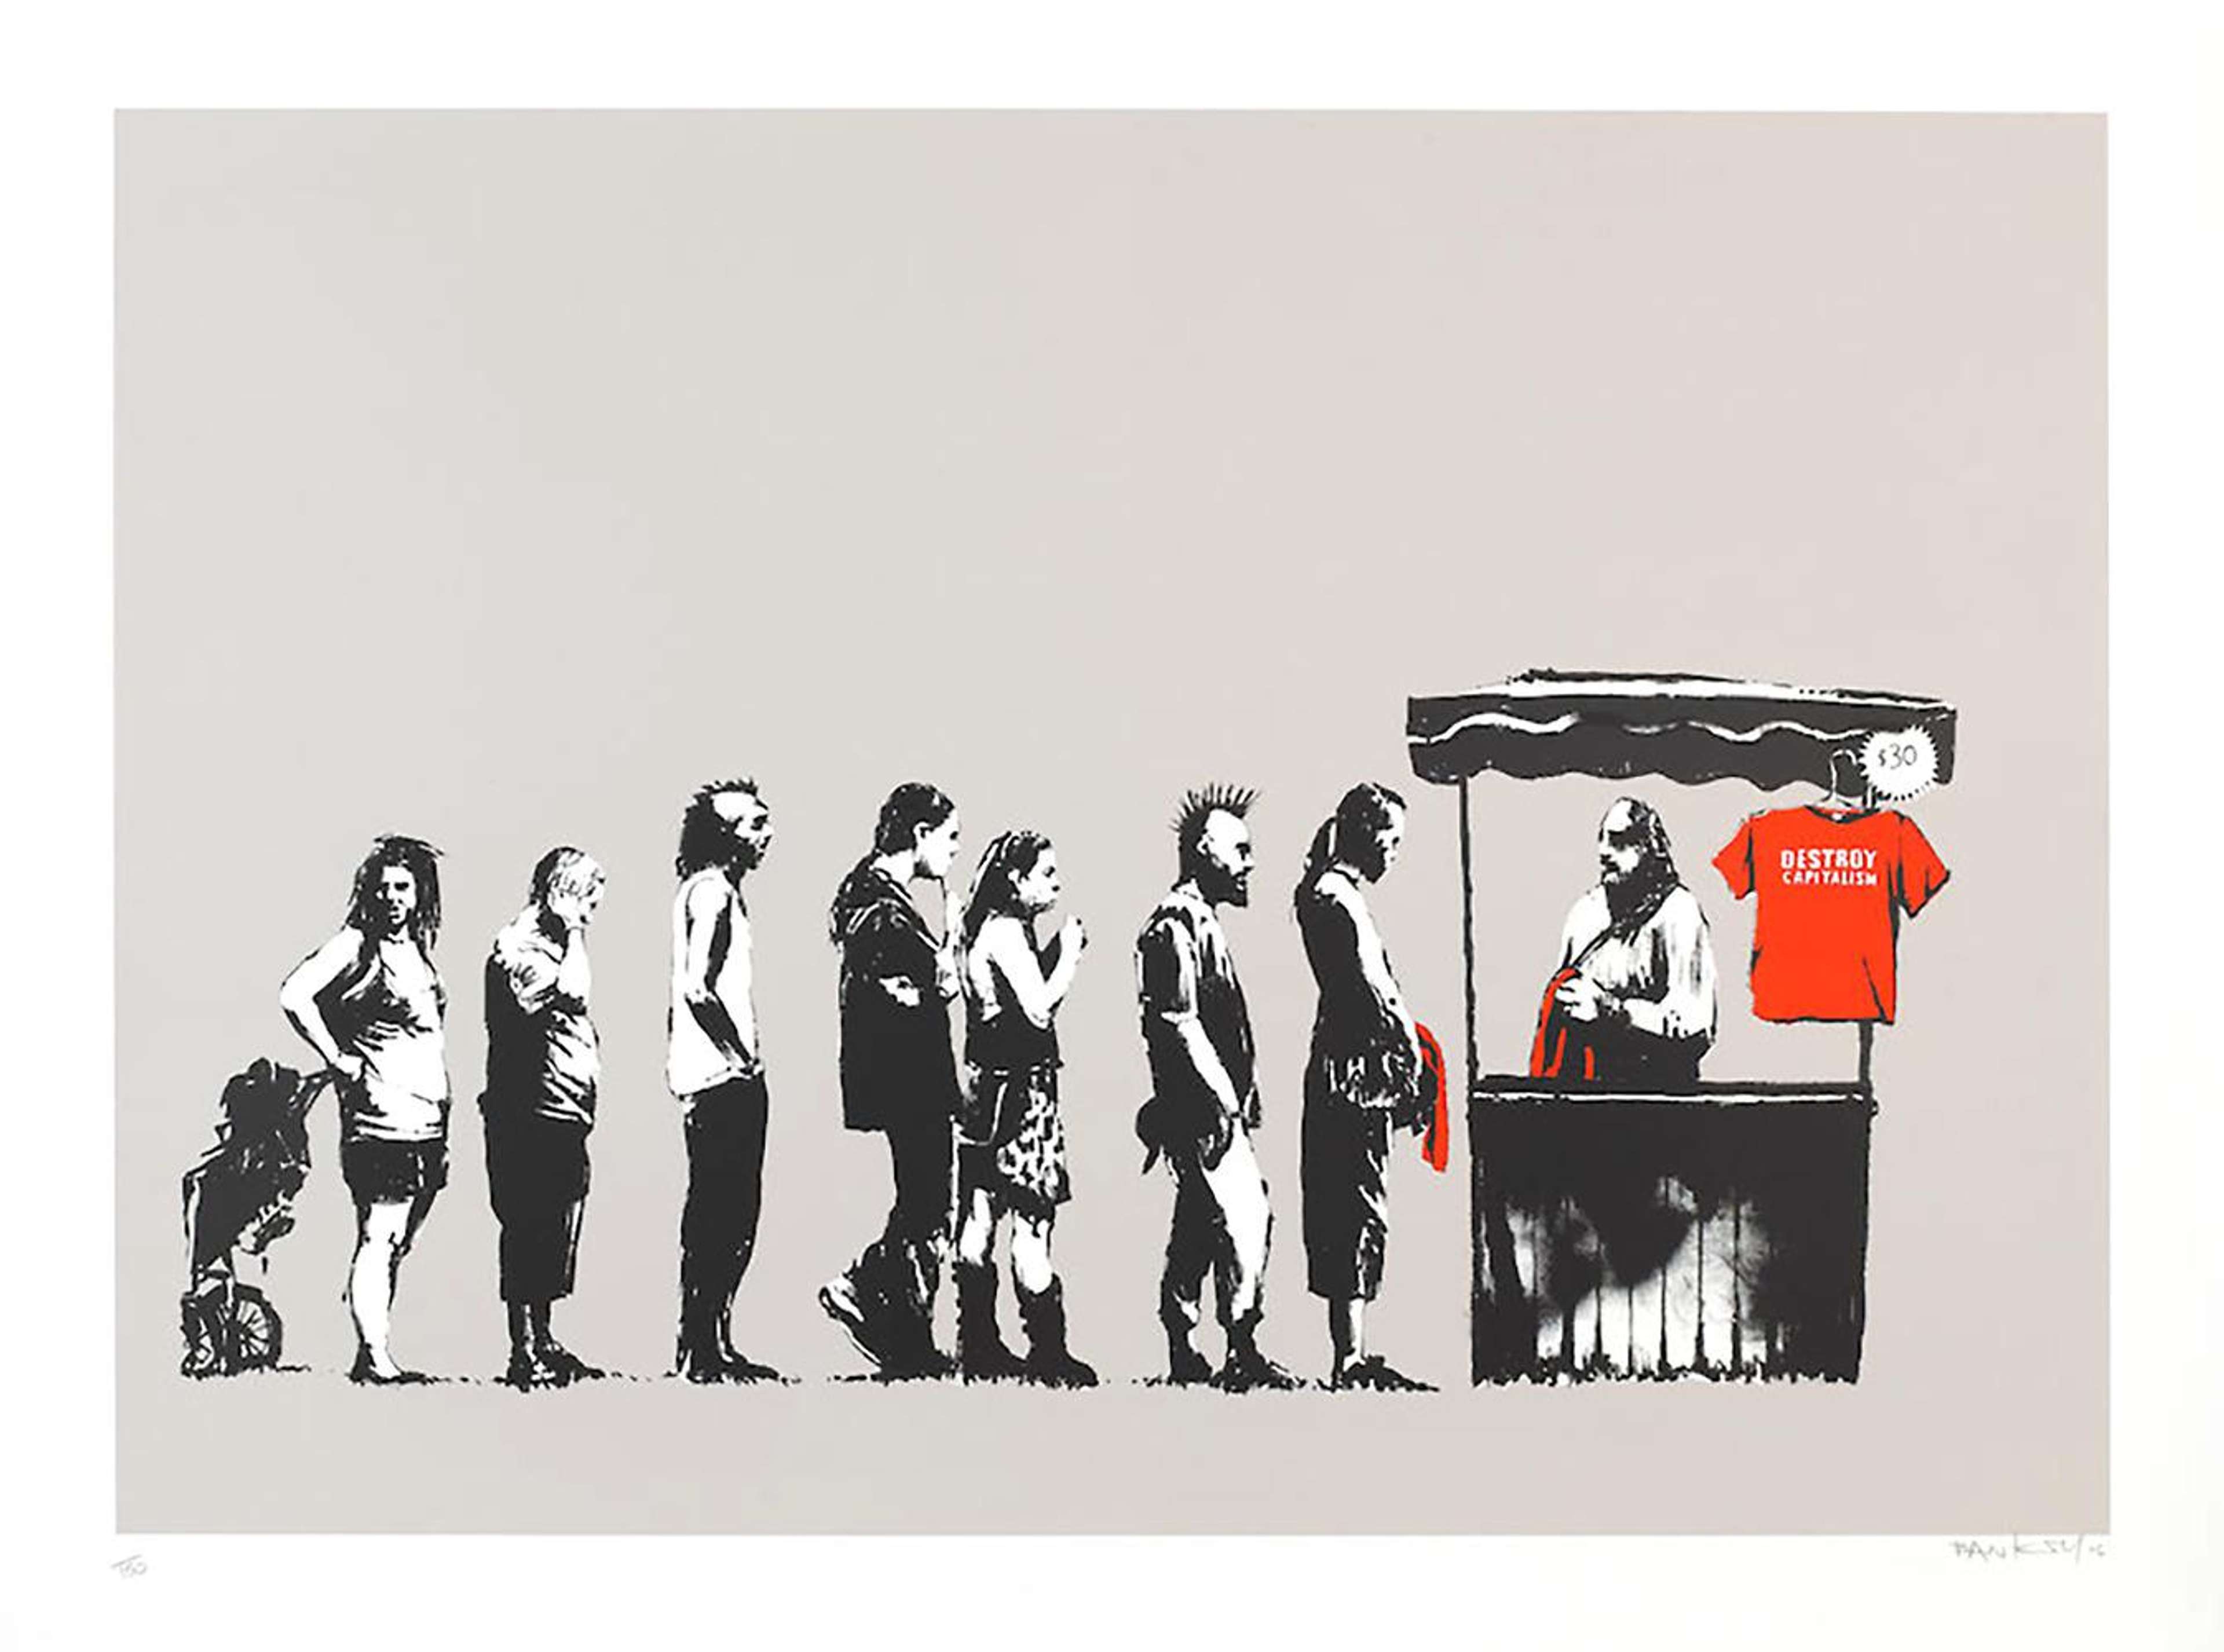 10 Facts About Banksy's Festival